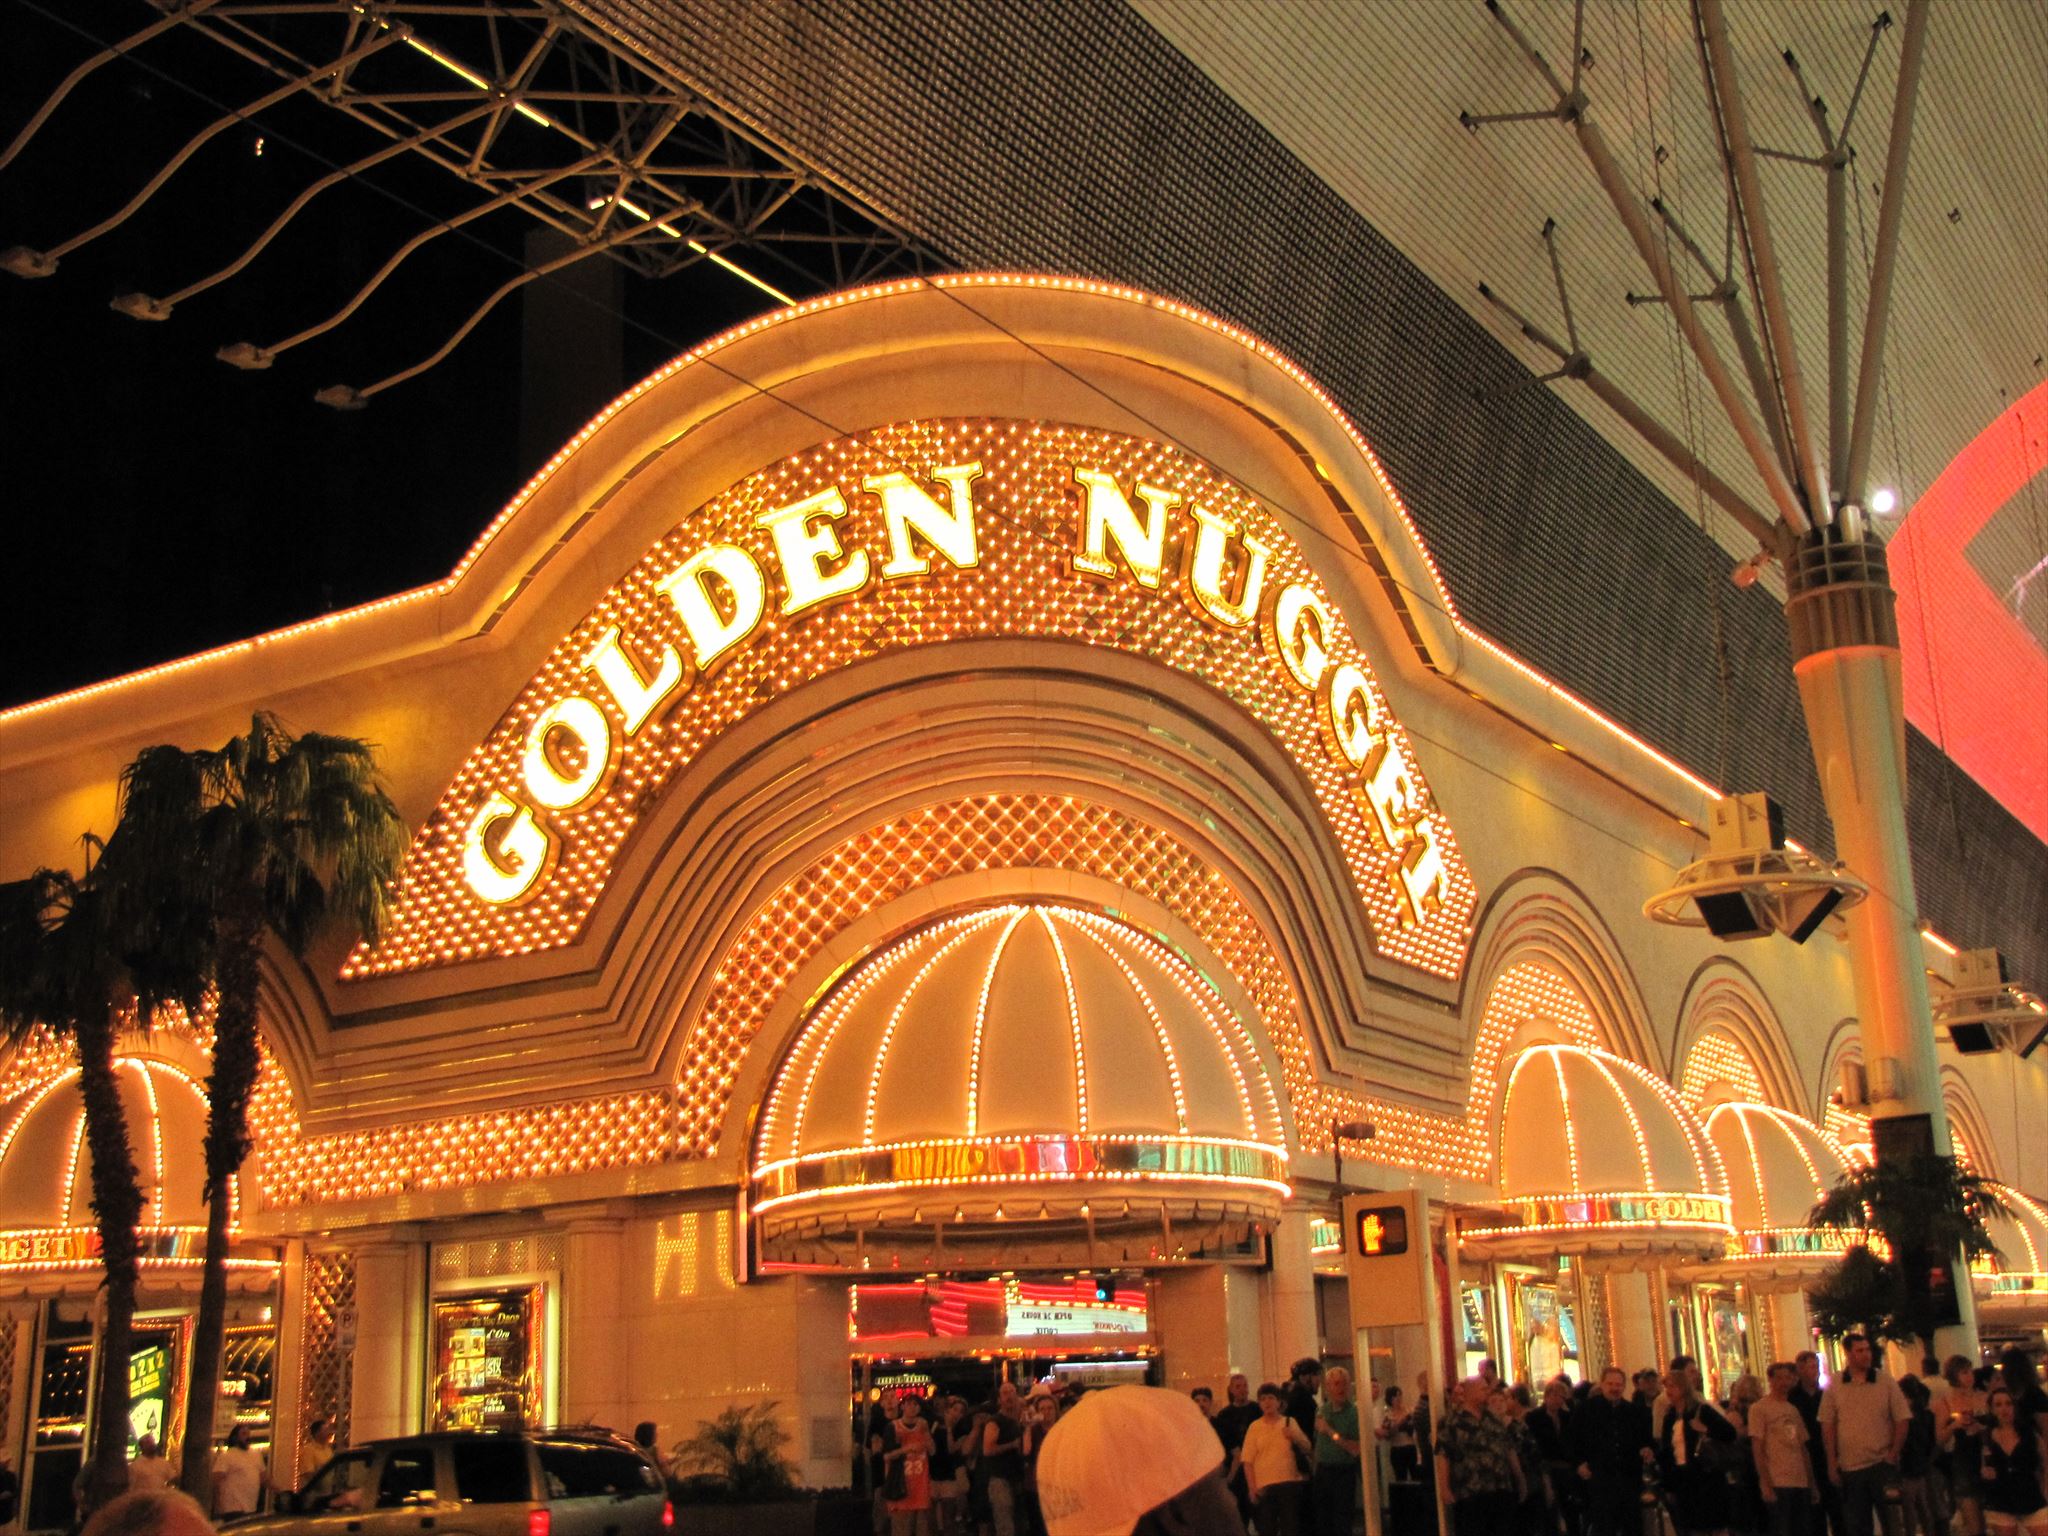 Golden Nugget Hotel And Casino